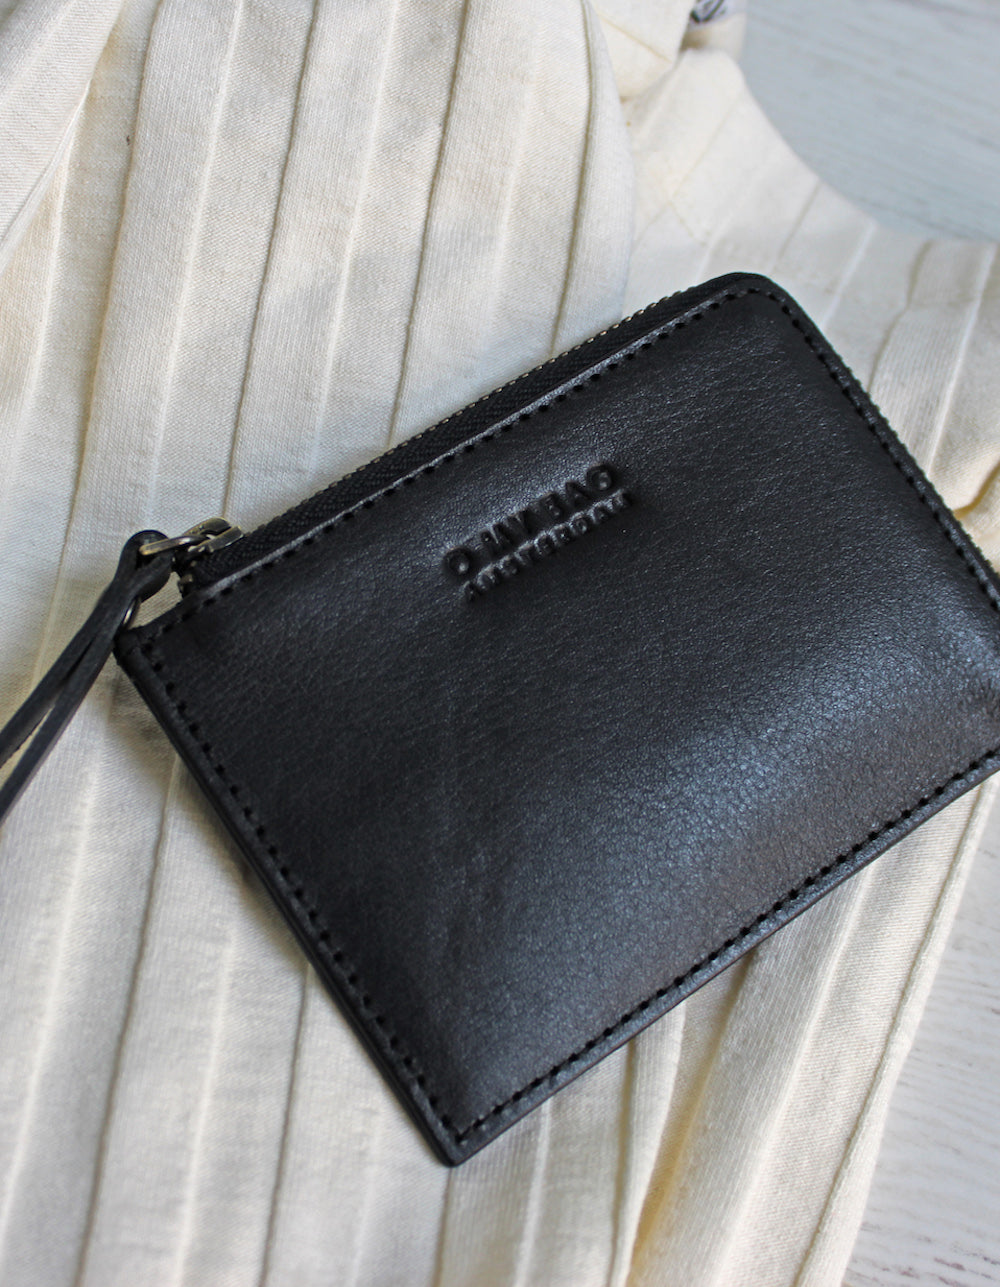 Small Black Classic Leather coin purse. Square shape. Lifestyle image